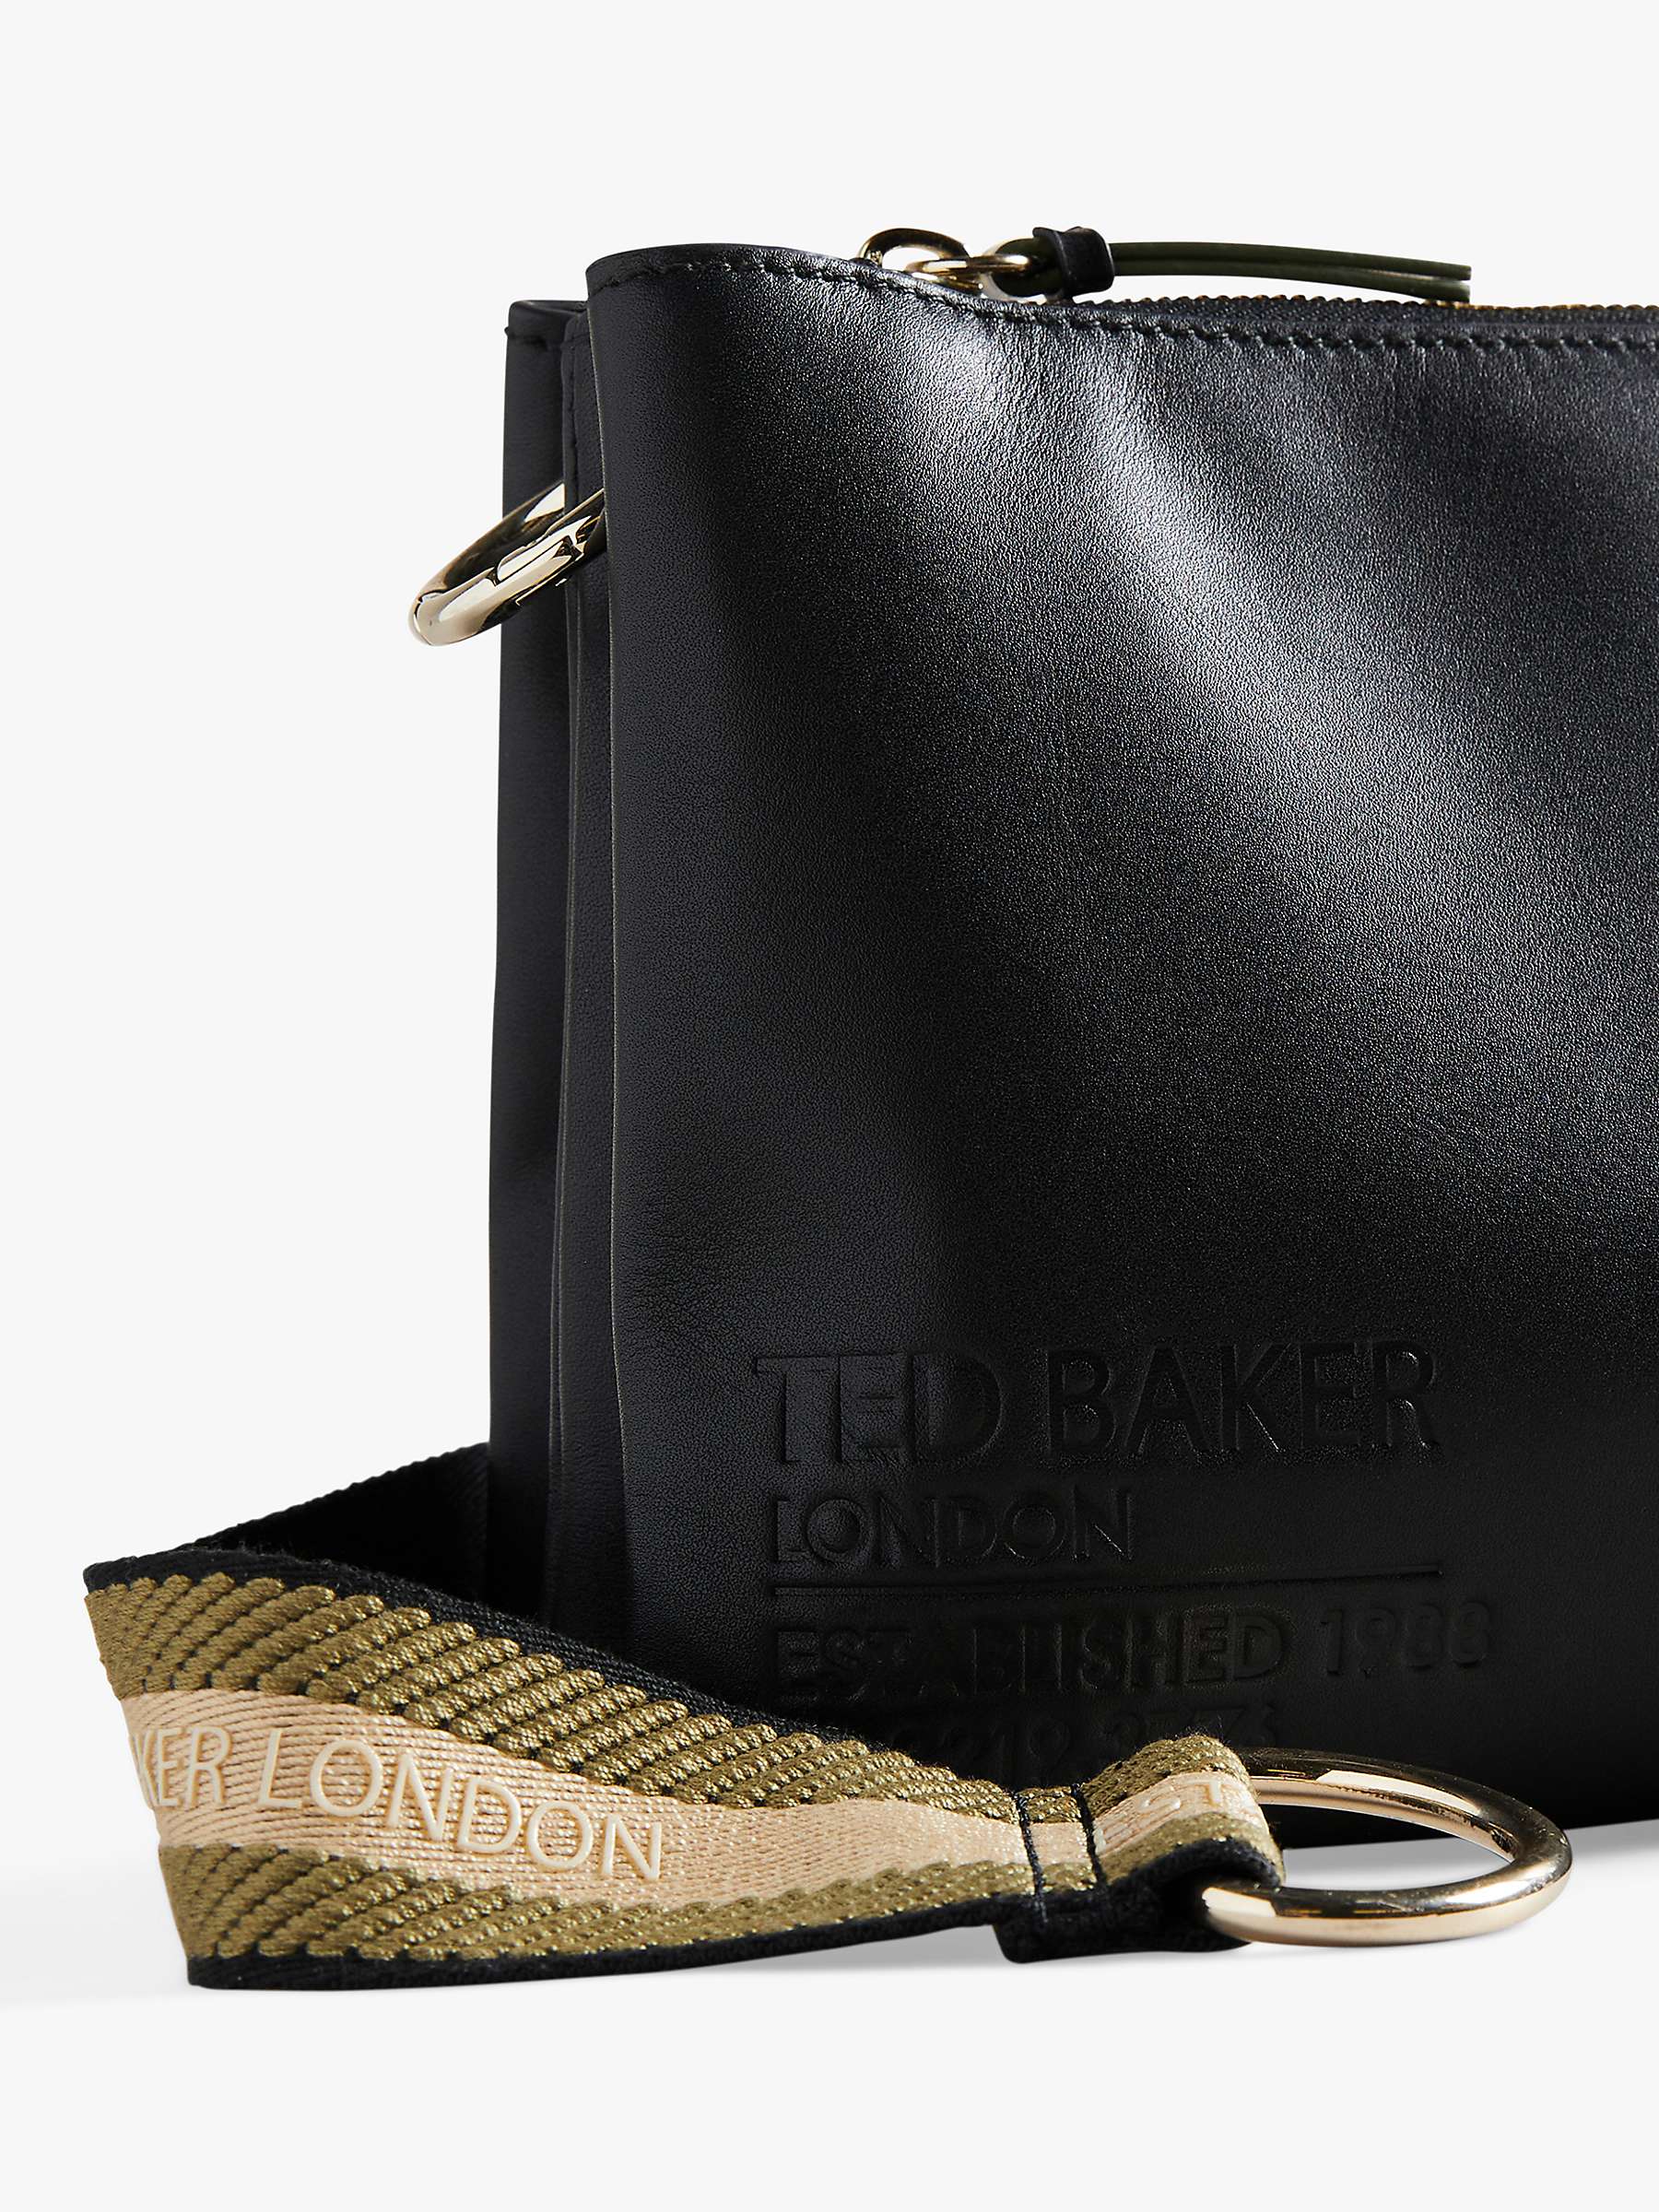 Buy Ted Baker Darceyy Leather Cross Body Bag Online at johnlewis.com